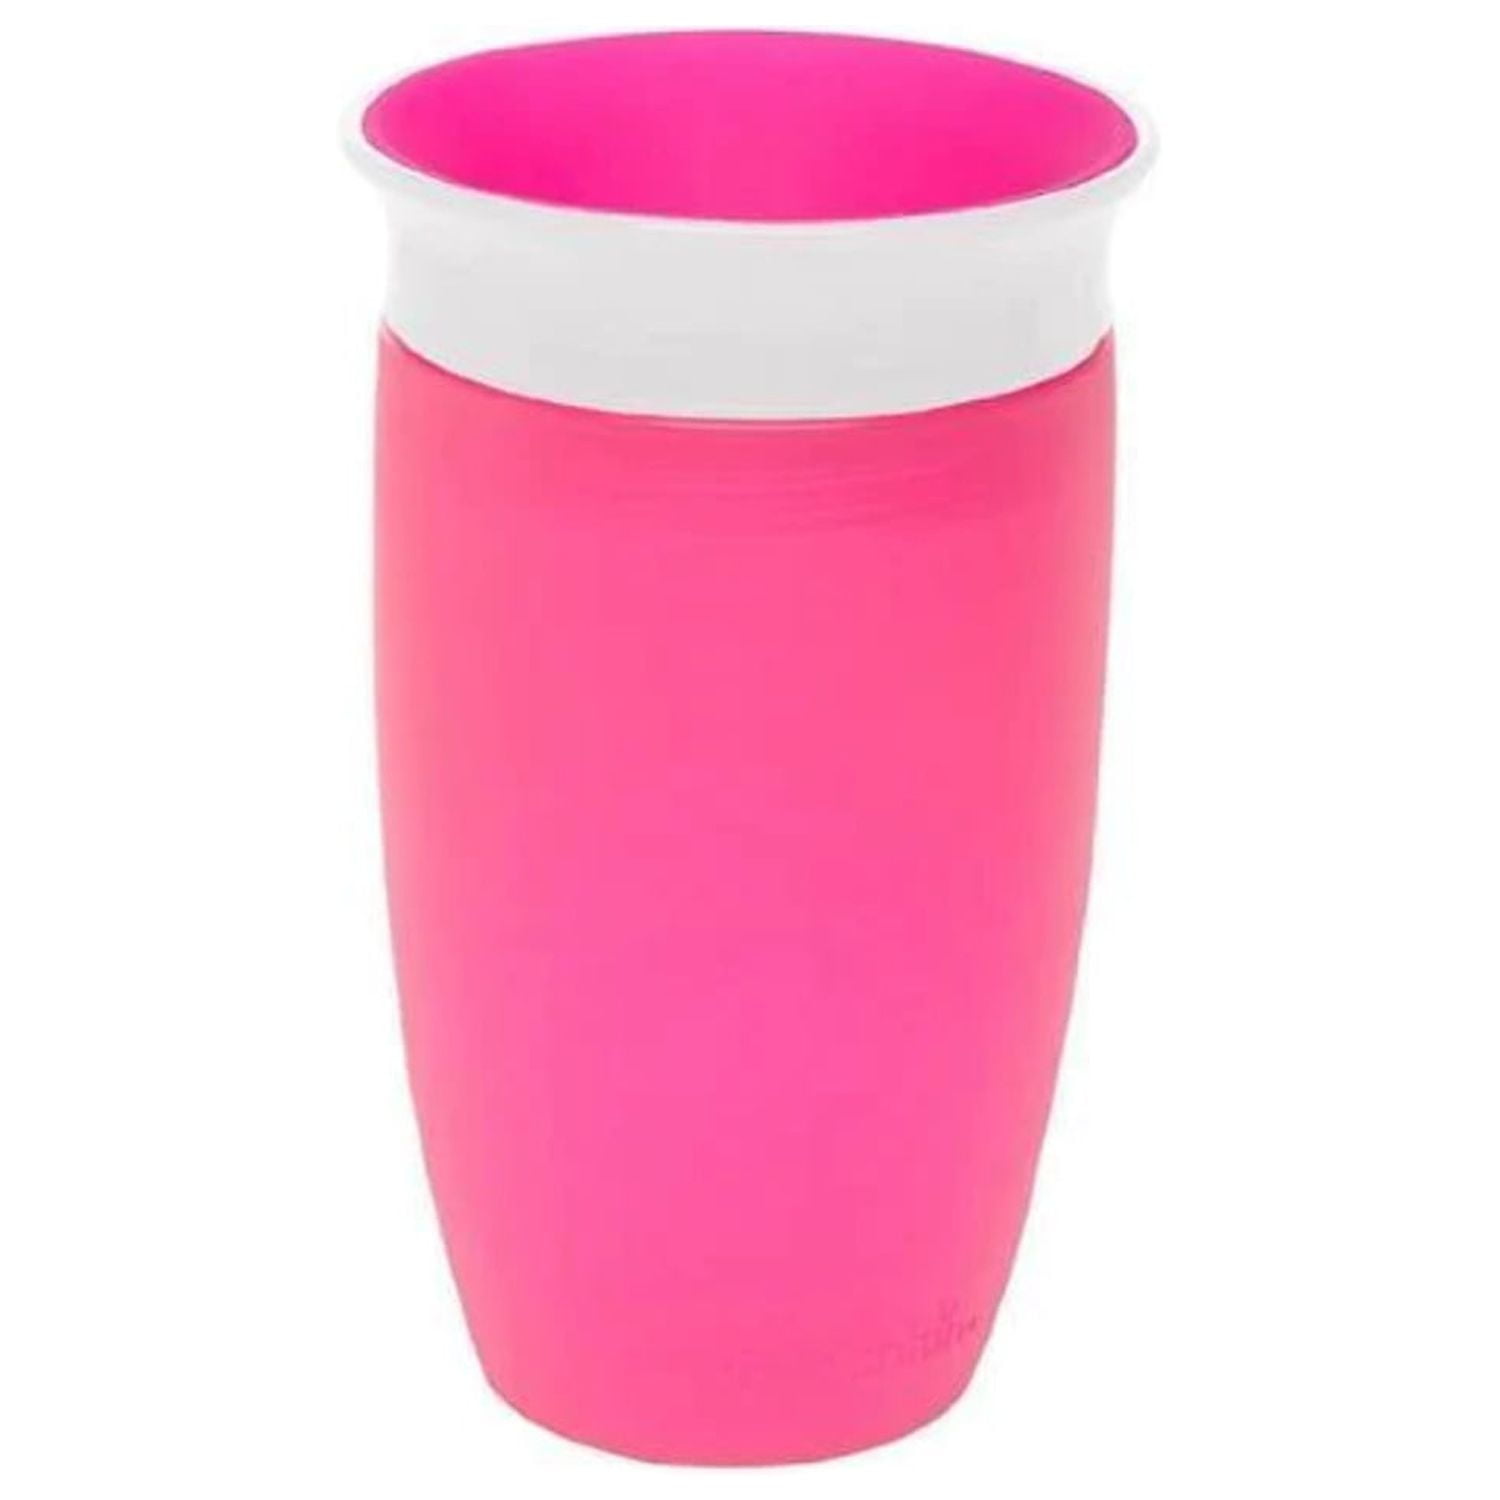 Best Sippy Cup: Drinking with Ease, Dignity, and Dementia